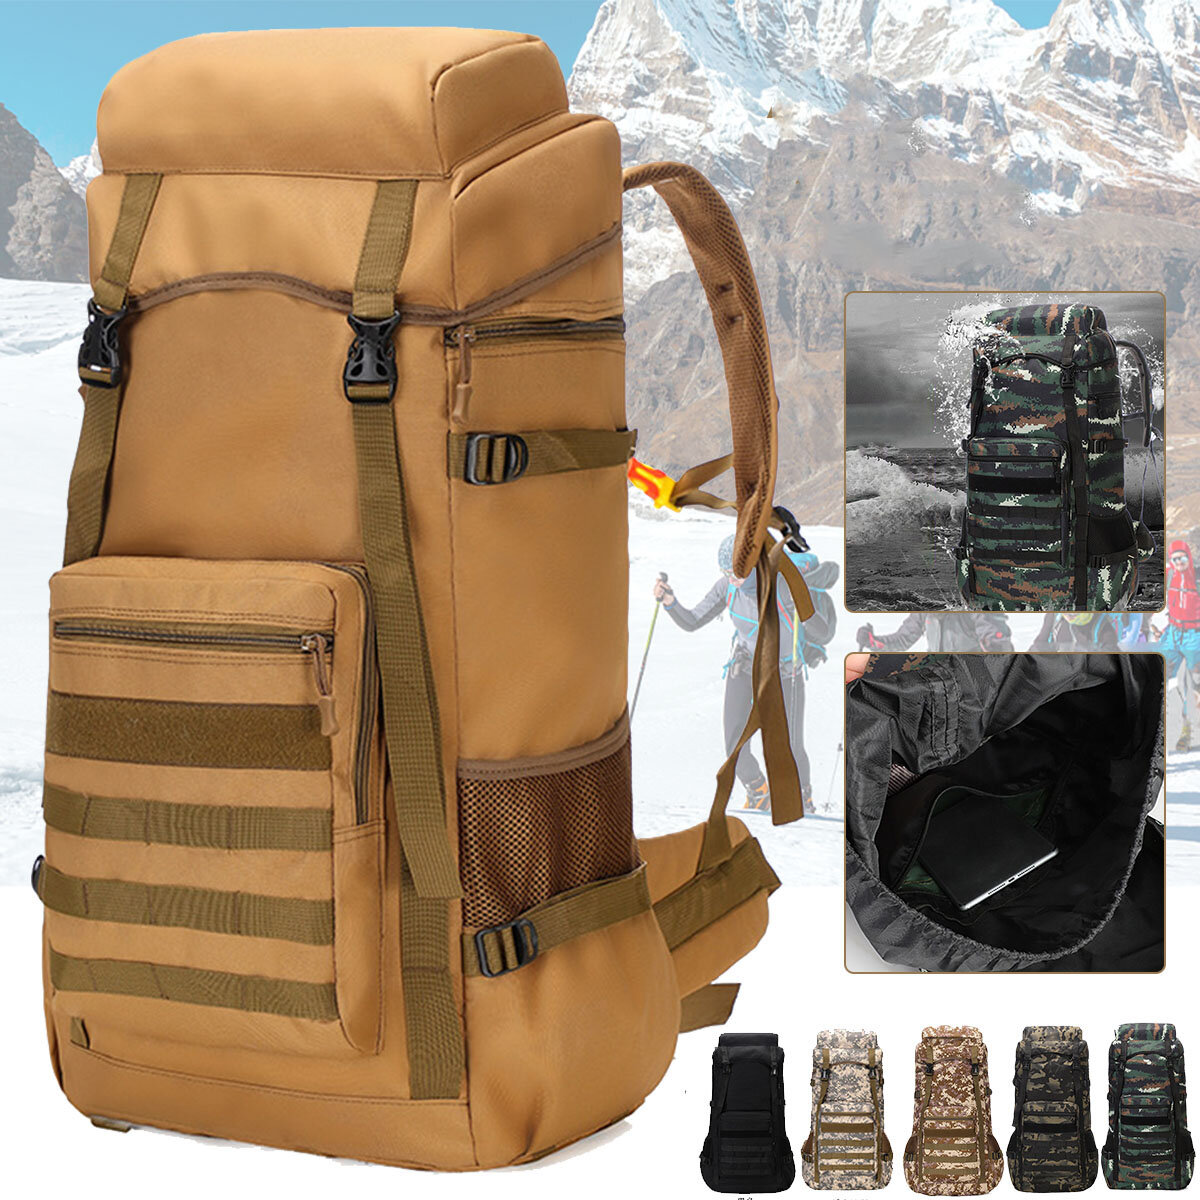 70L Outdoor Waterproof Military Tactical Backpack Camping Hiking Backpack Trekking Camouflage Travel